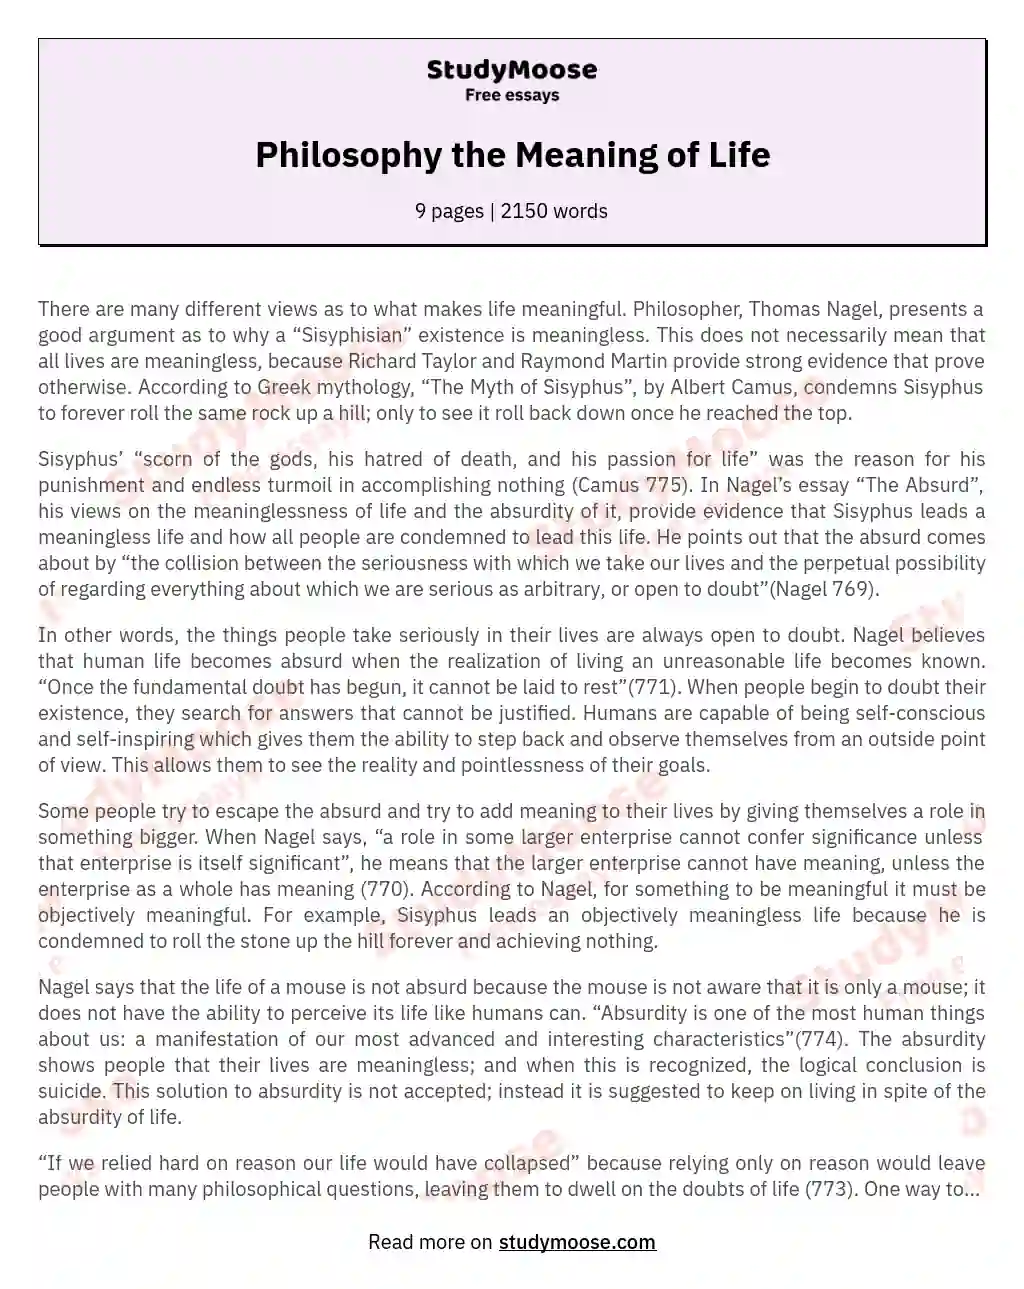 Philosophy the Meaning of Life